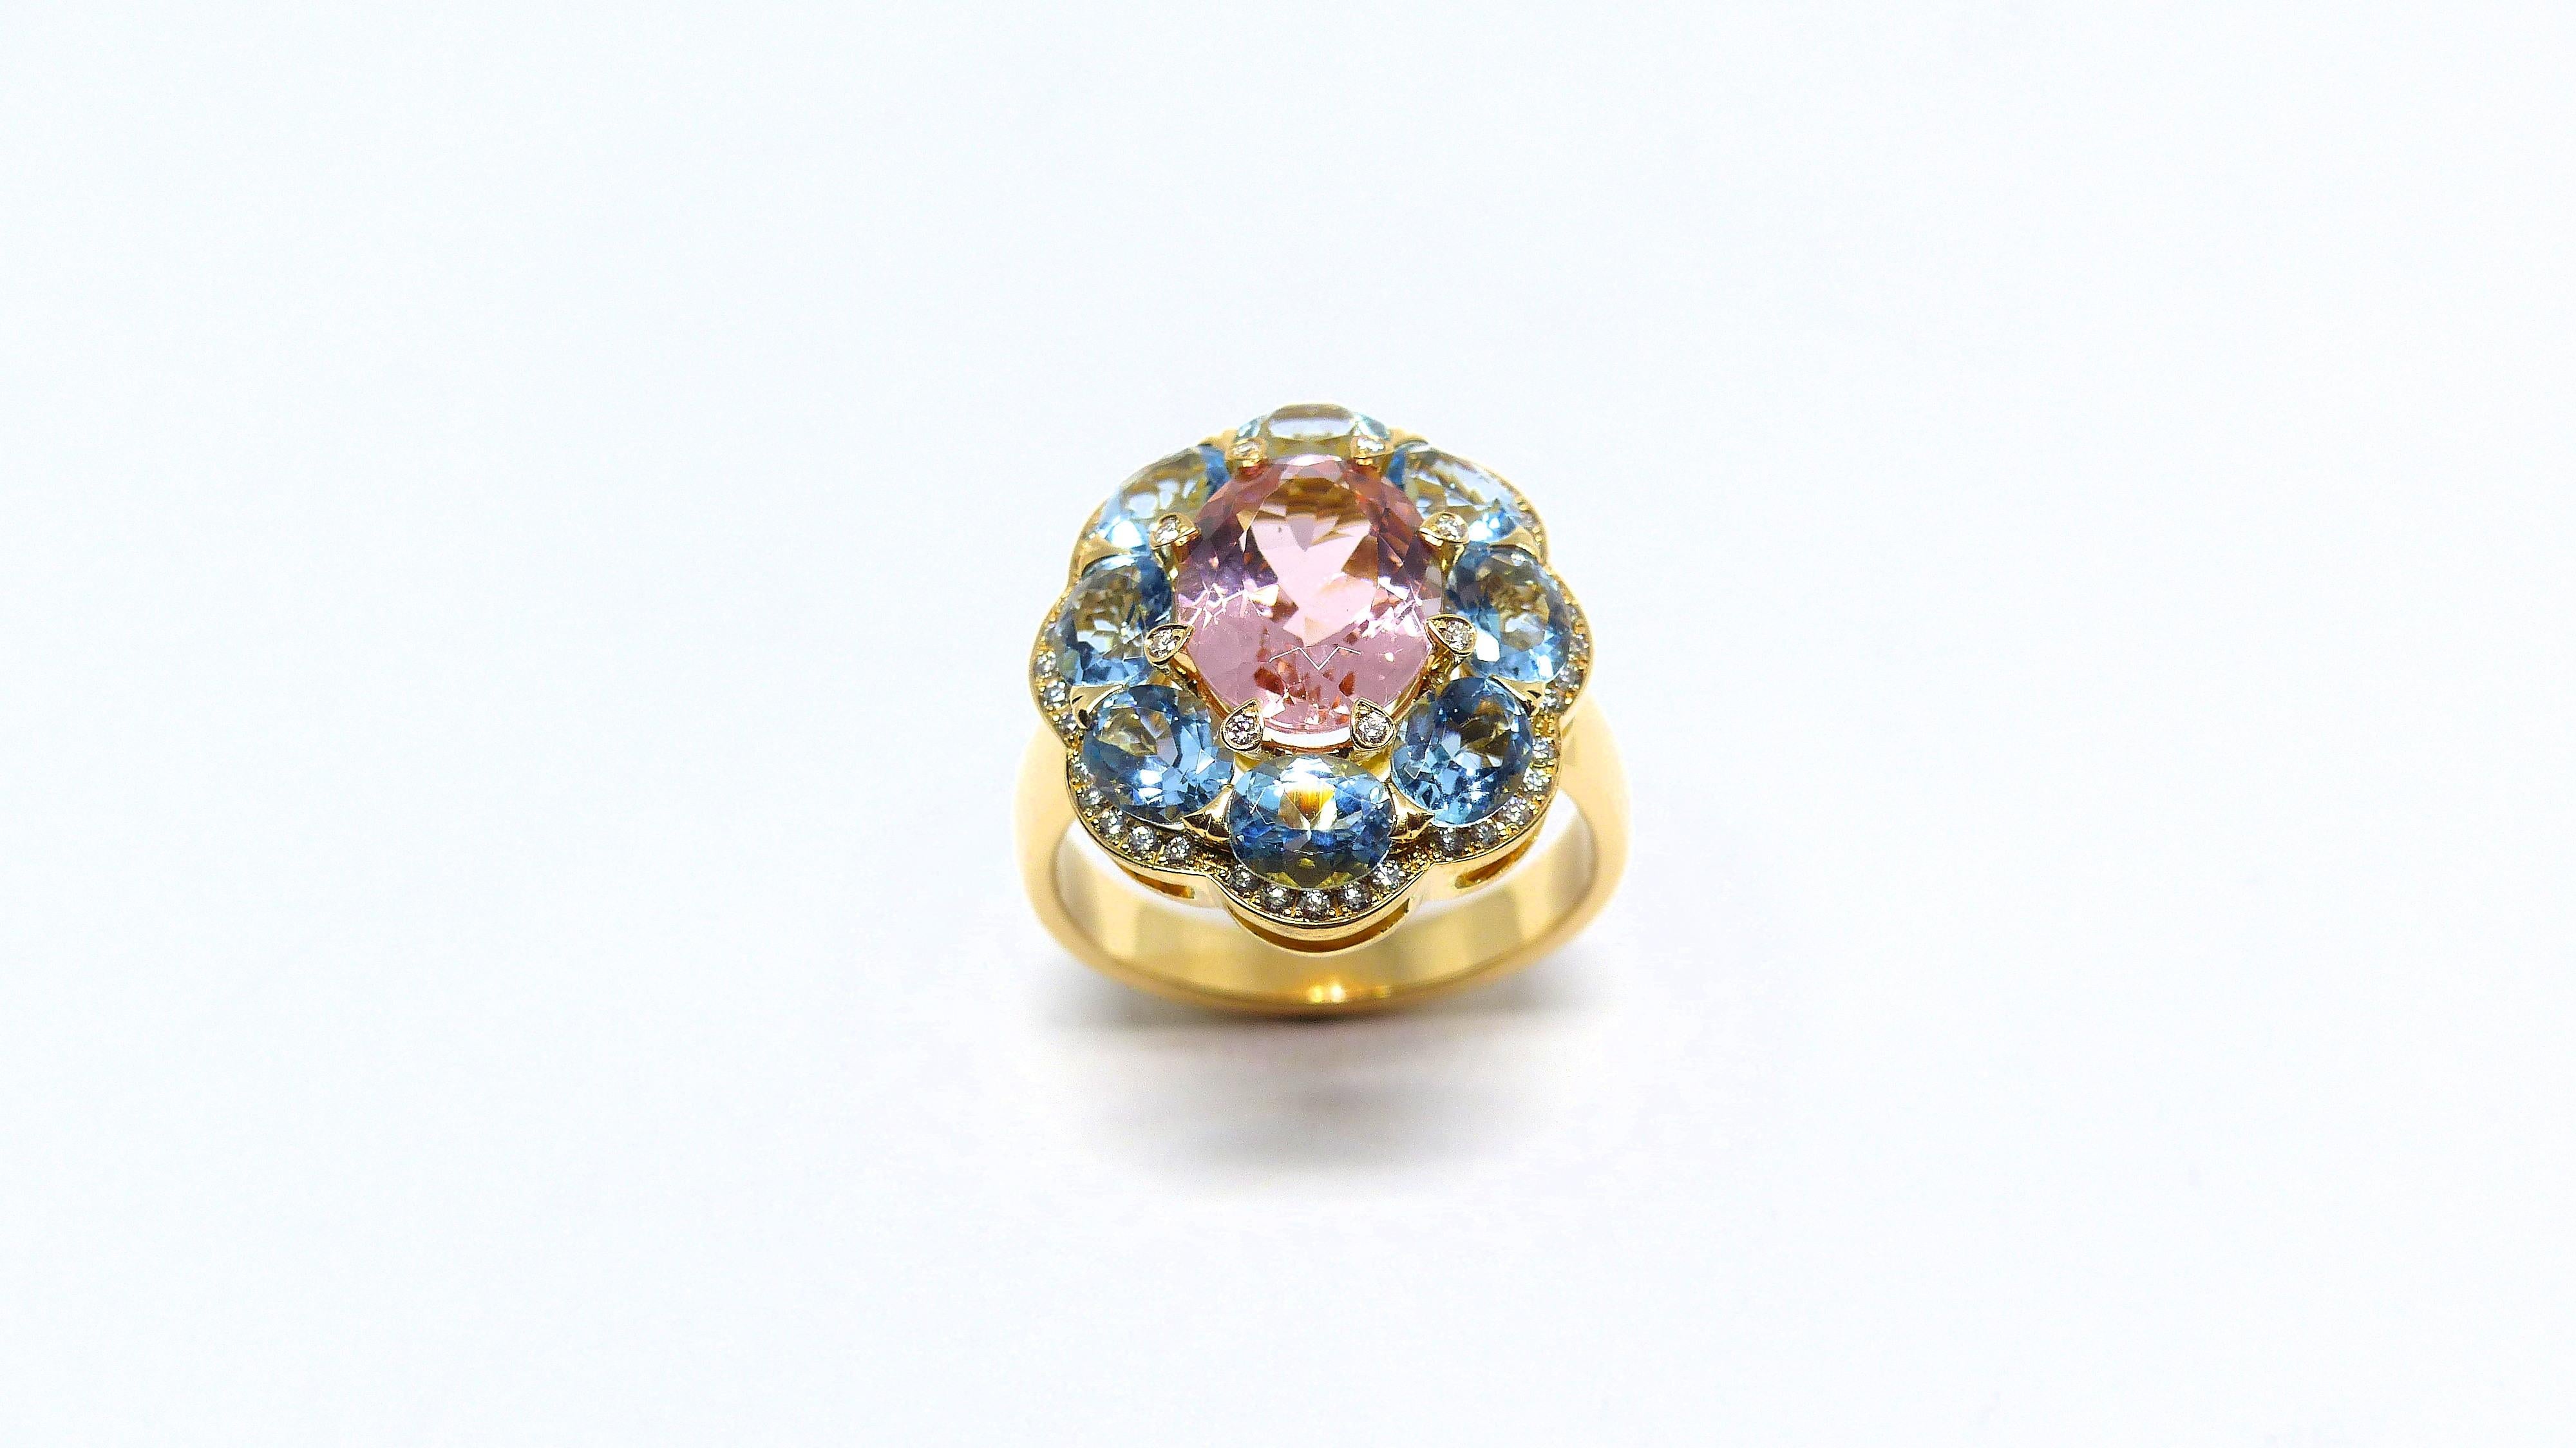 Thomas Leyser is renowned for his contemporary jewellery designs utilizing fine gemstones. 

This 18k rose gold ring 8,52gr. with 1 pink Tourmaline top quality facetted oval 10x8mm, 2,25cts. + 8 Aqumarines top quality facetted oval 5x4mm, 2,25cts. +